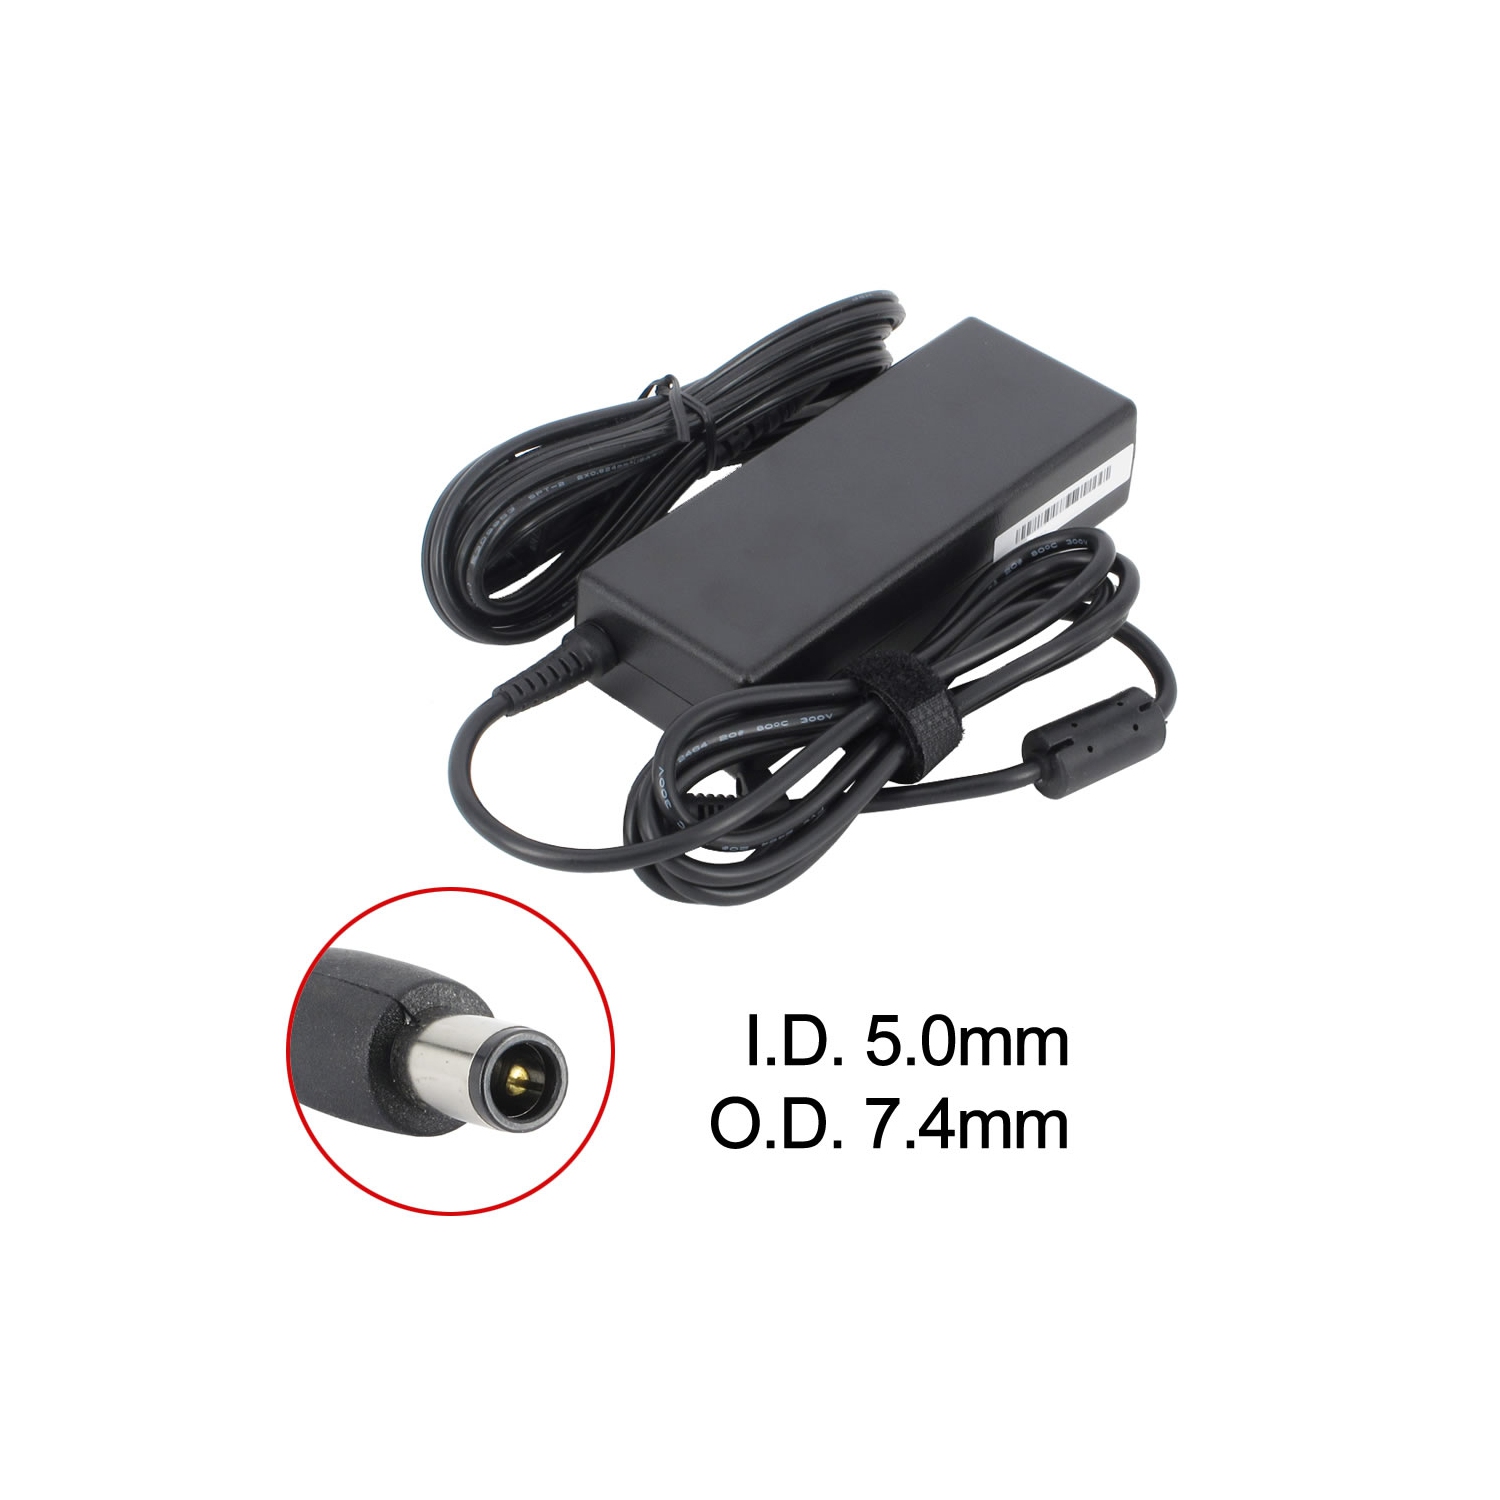 New Laptop AC Adapter for HP Pavilion dv7t-2000 CTO, 397824-001, 463553-001, 608425-002, ED495ET, PA-1900-18H2, PPP014S-S